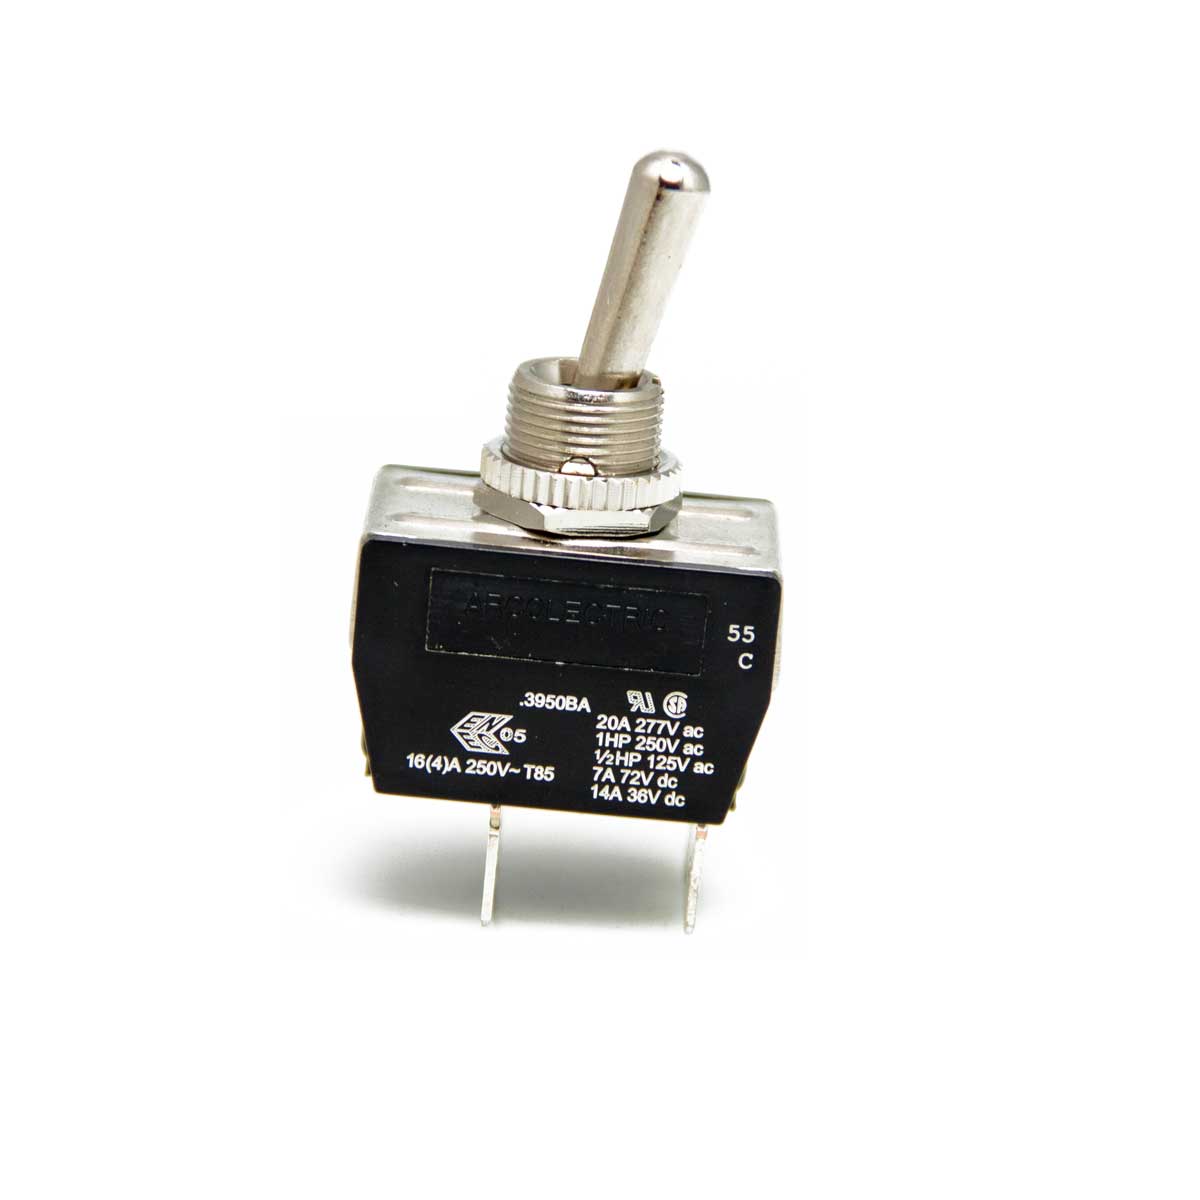 2 Position Power Switch